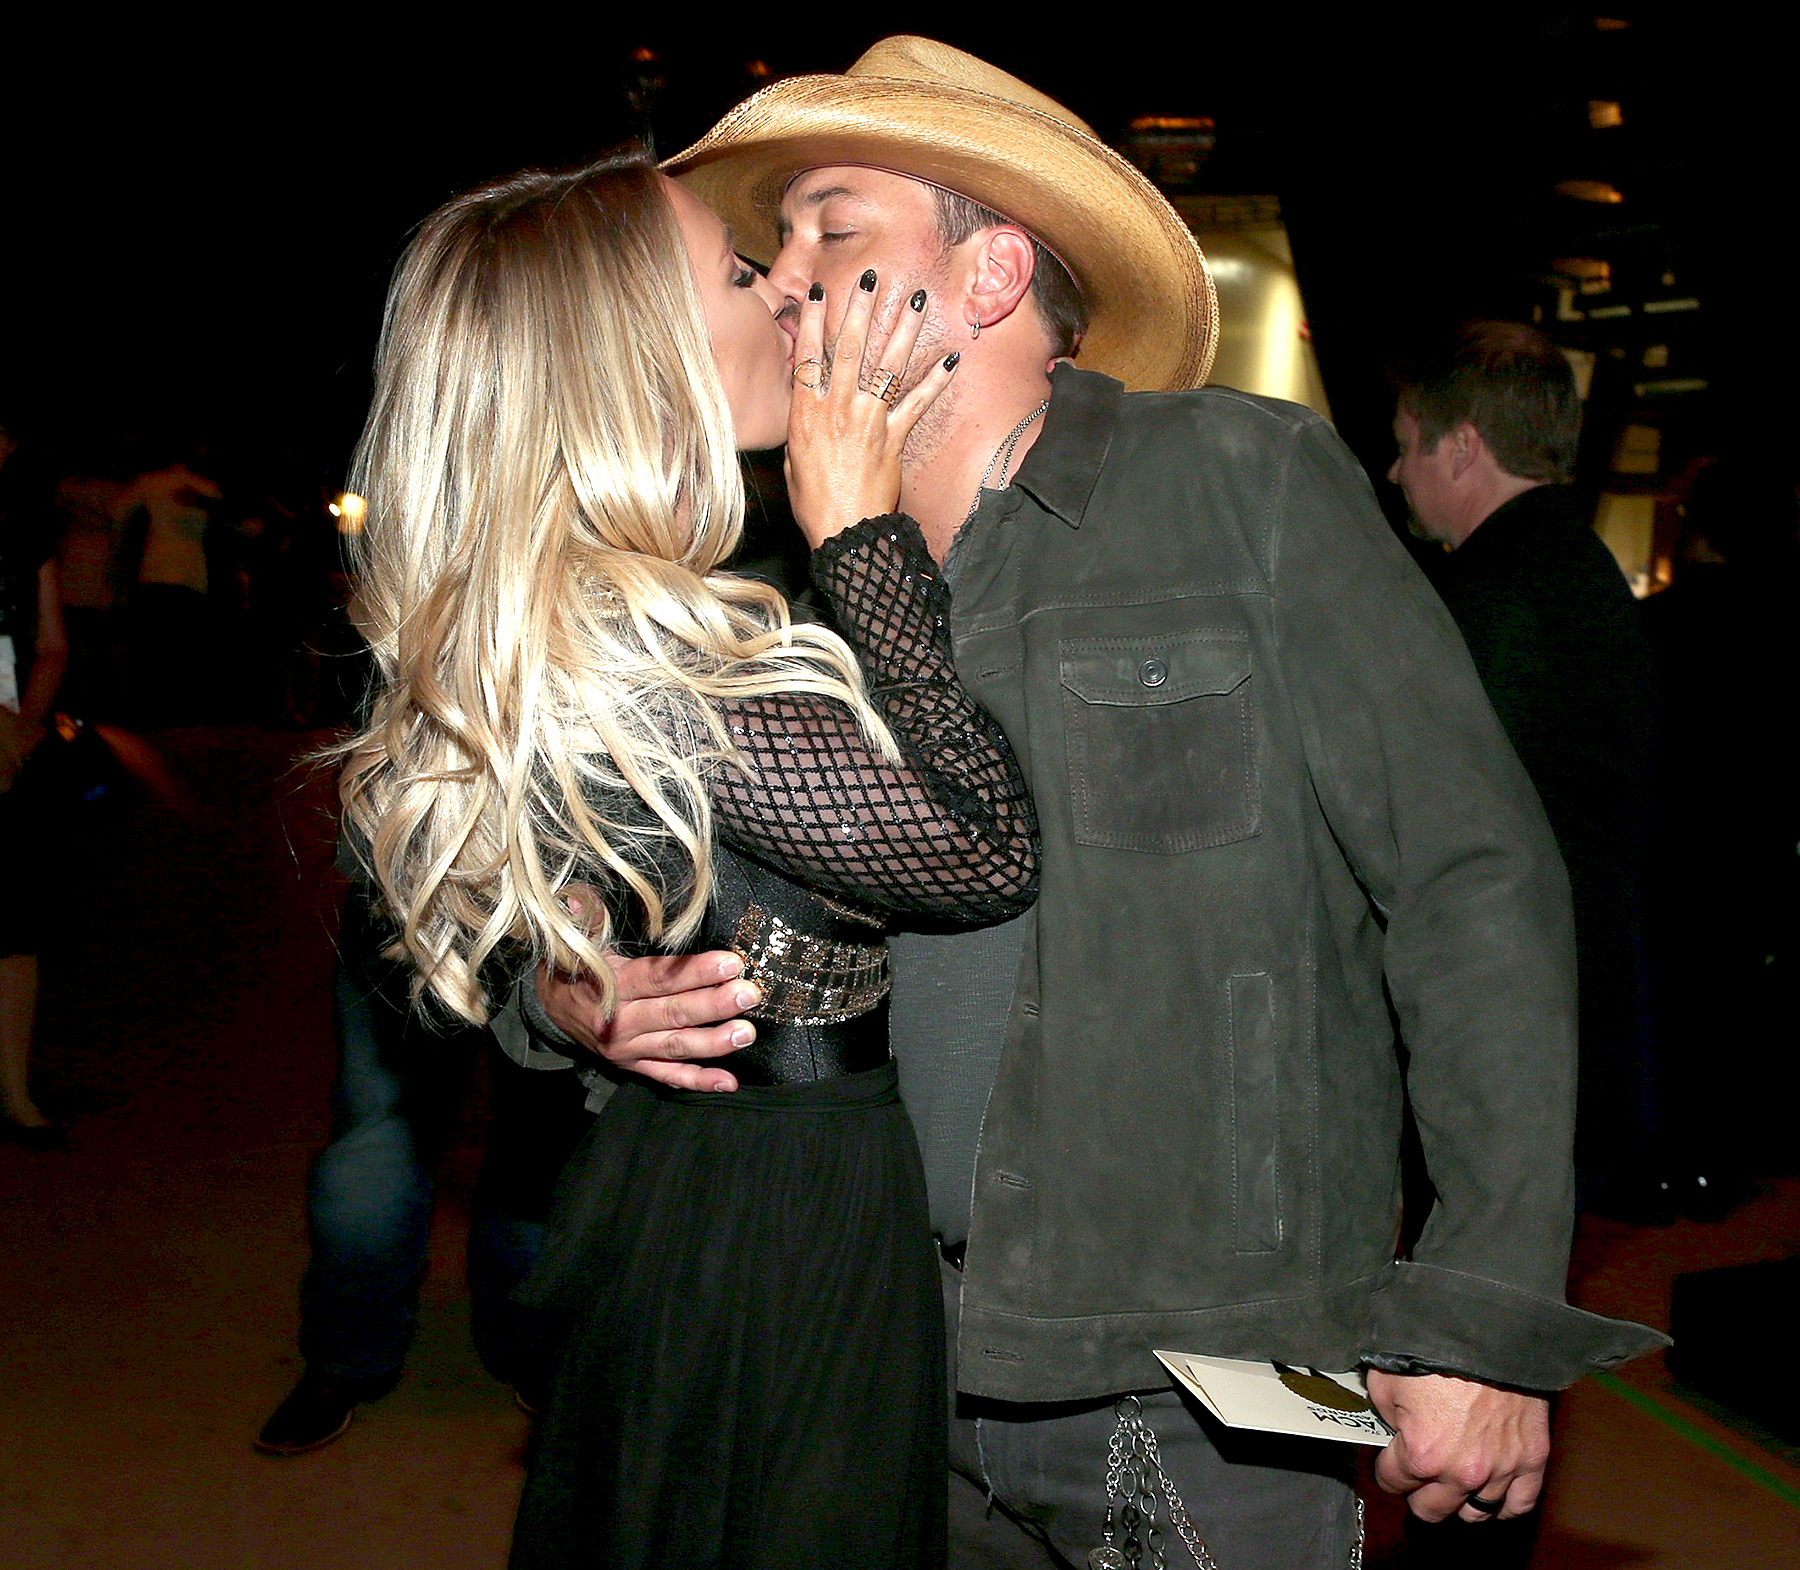 Jason Aldean Kisses Wife Brittany Kerr After Acm Awards 2016 Win Video